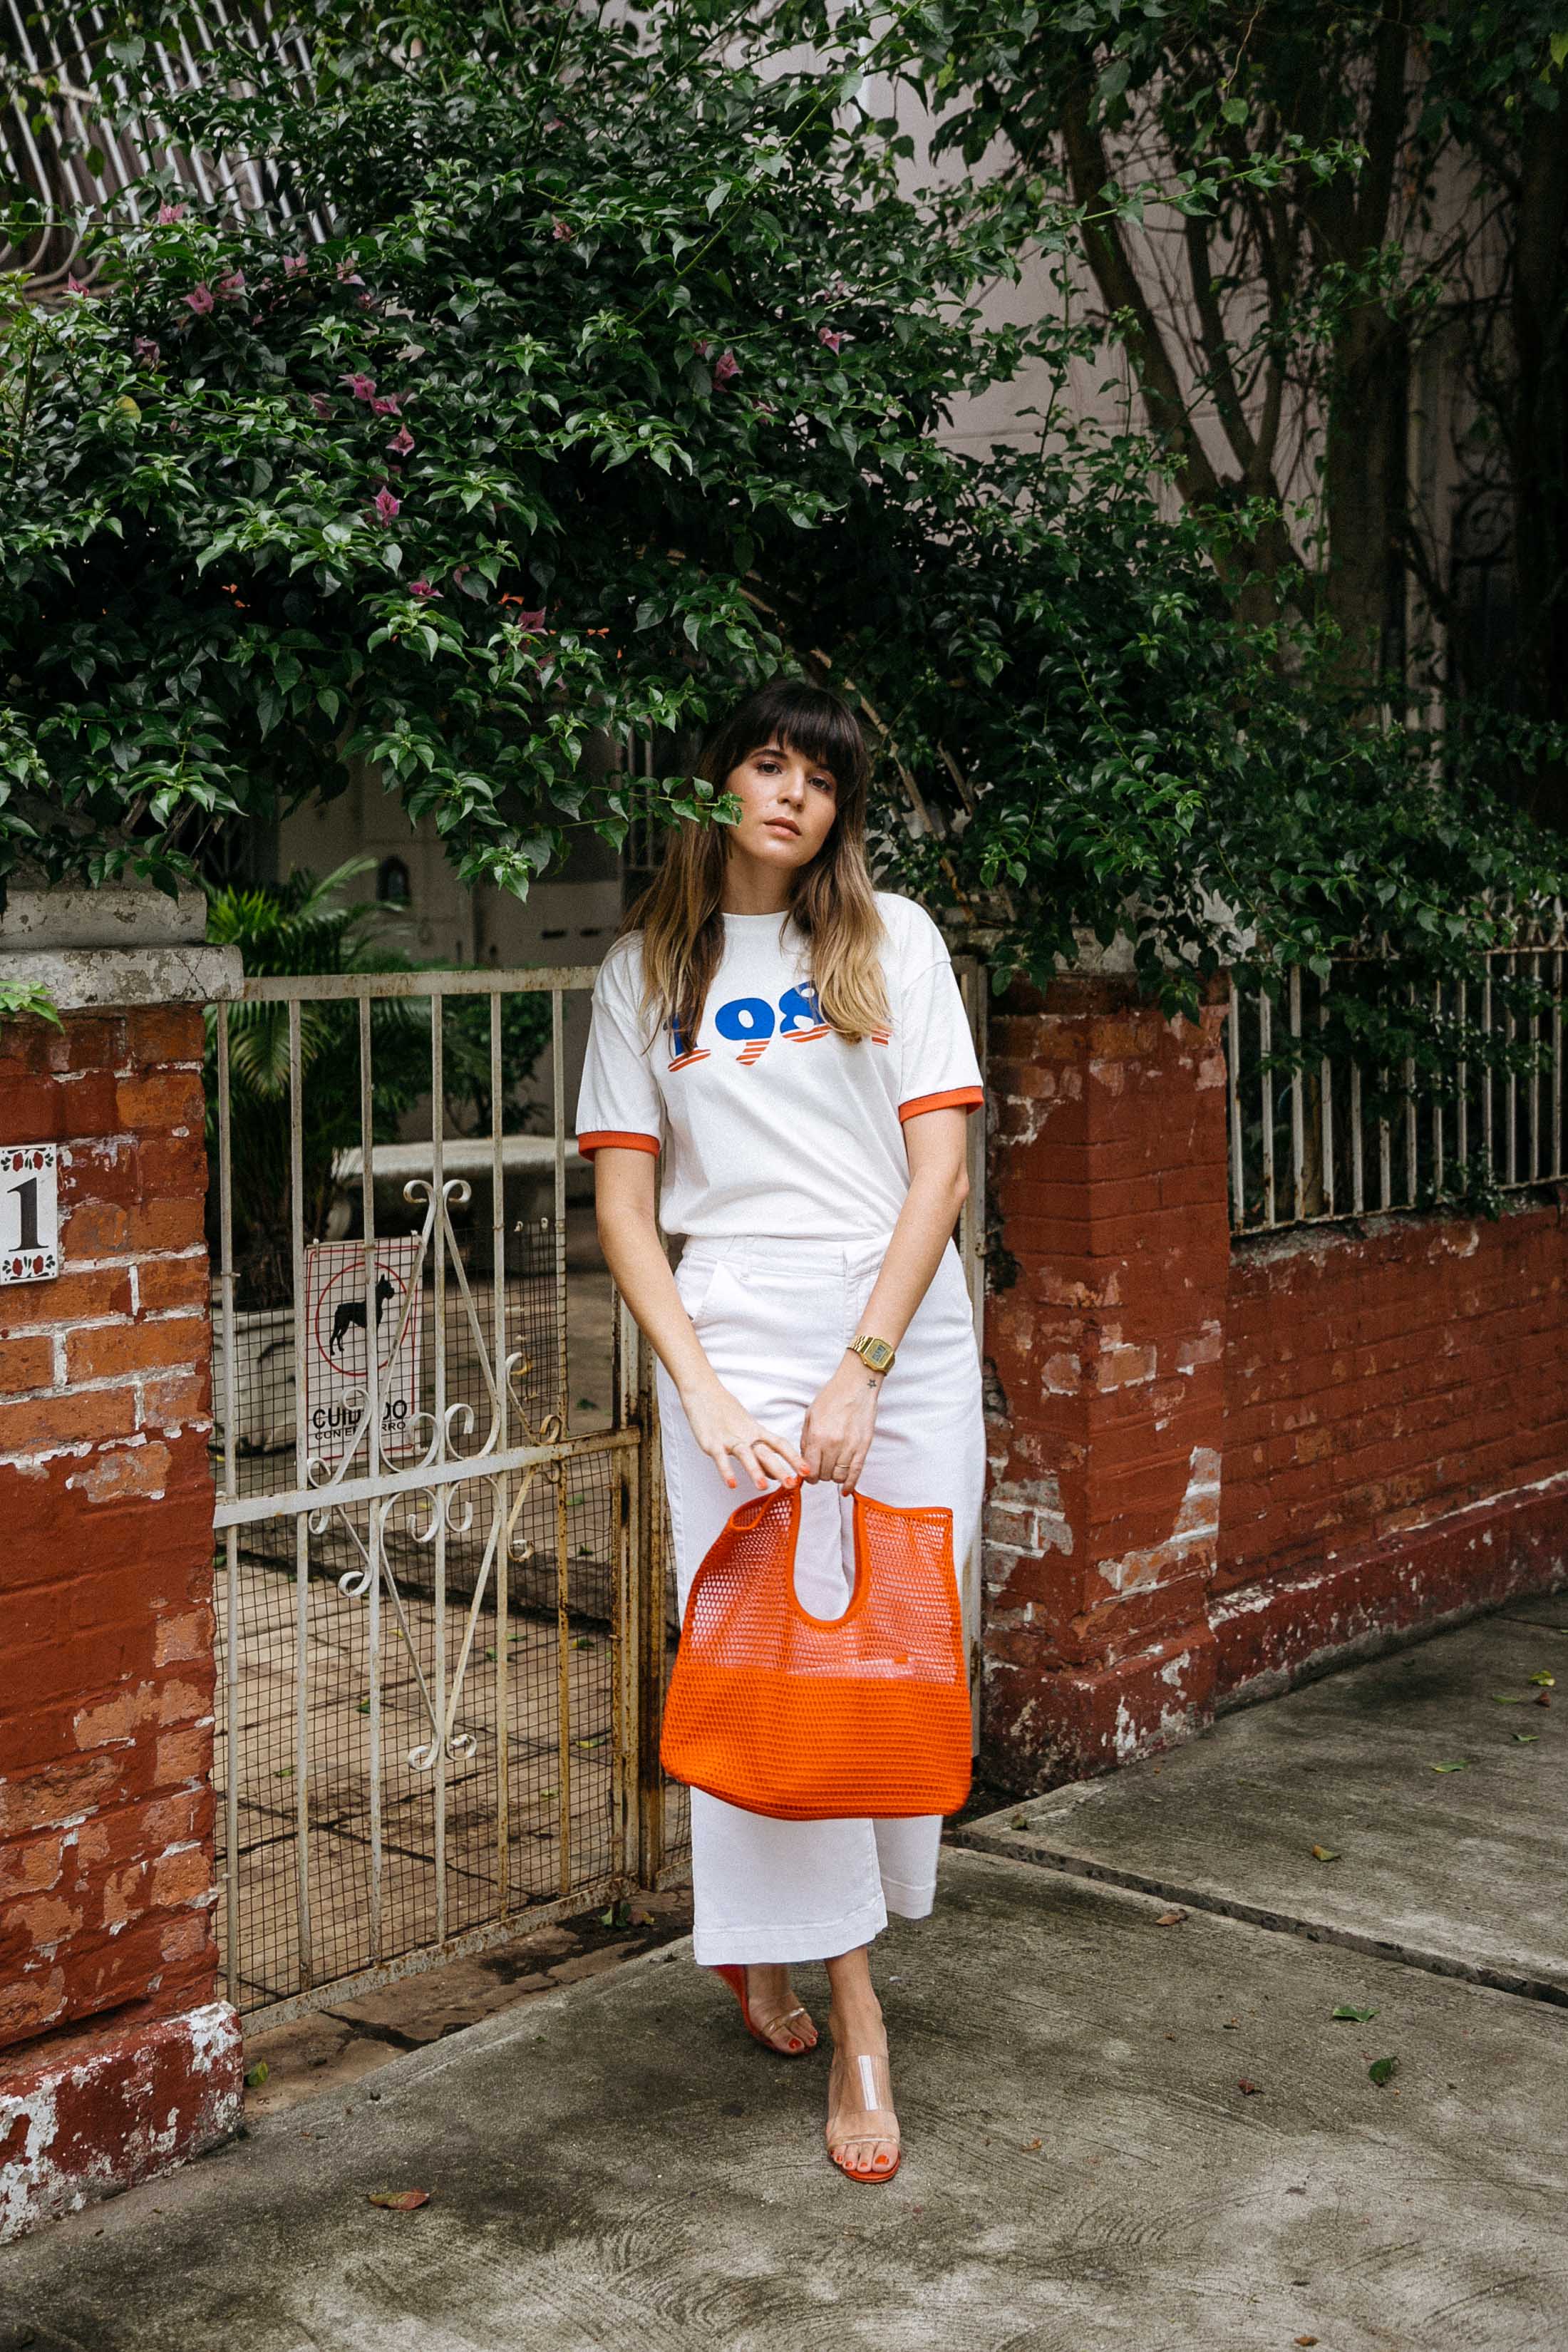 Maristella wears a graphic tee with jeans and wedge sandals